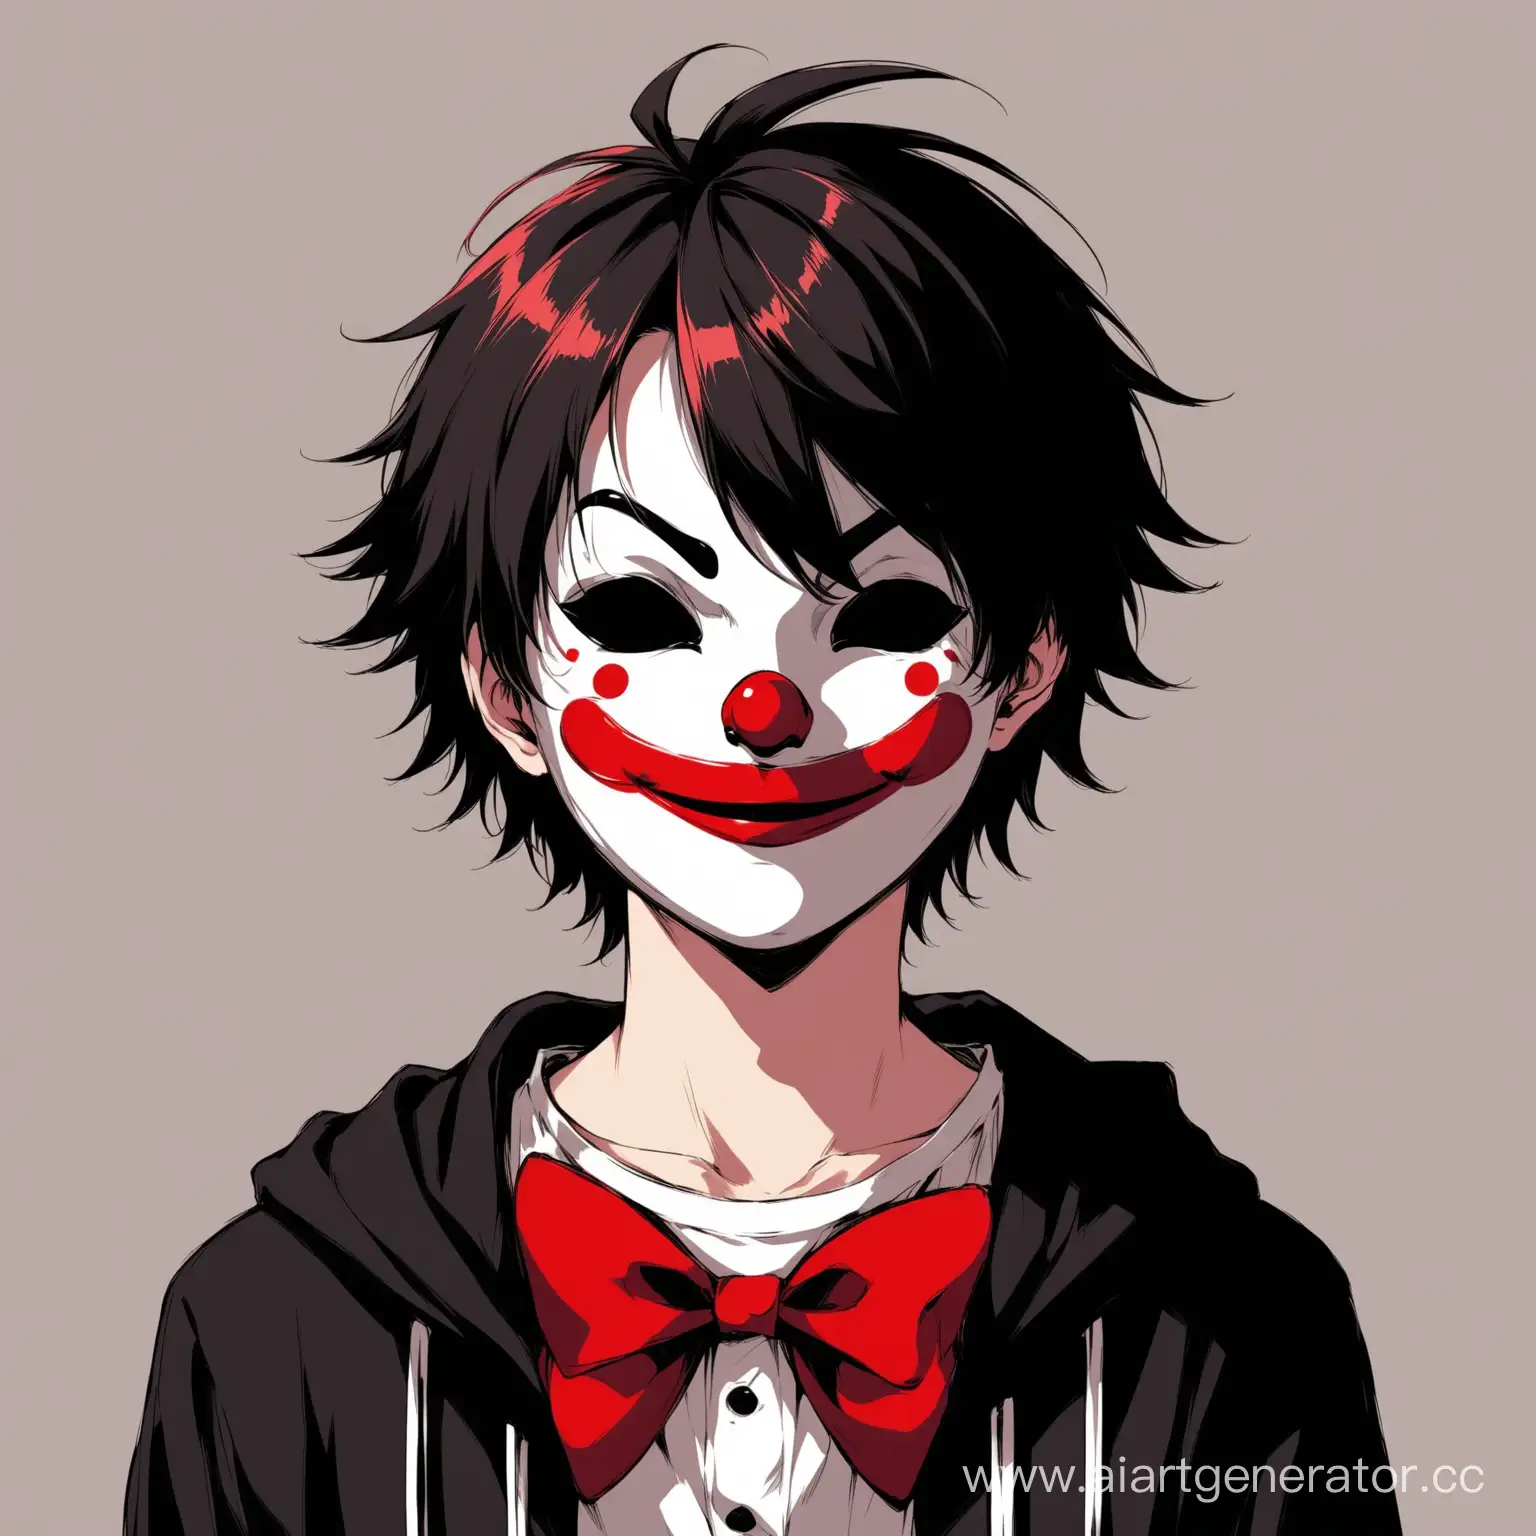 Anime-Style-Teenage-Boy-with-Clown-Mask-in-Black-Red-and-White-Colors